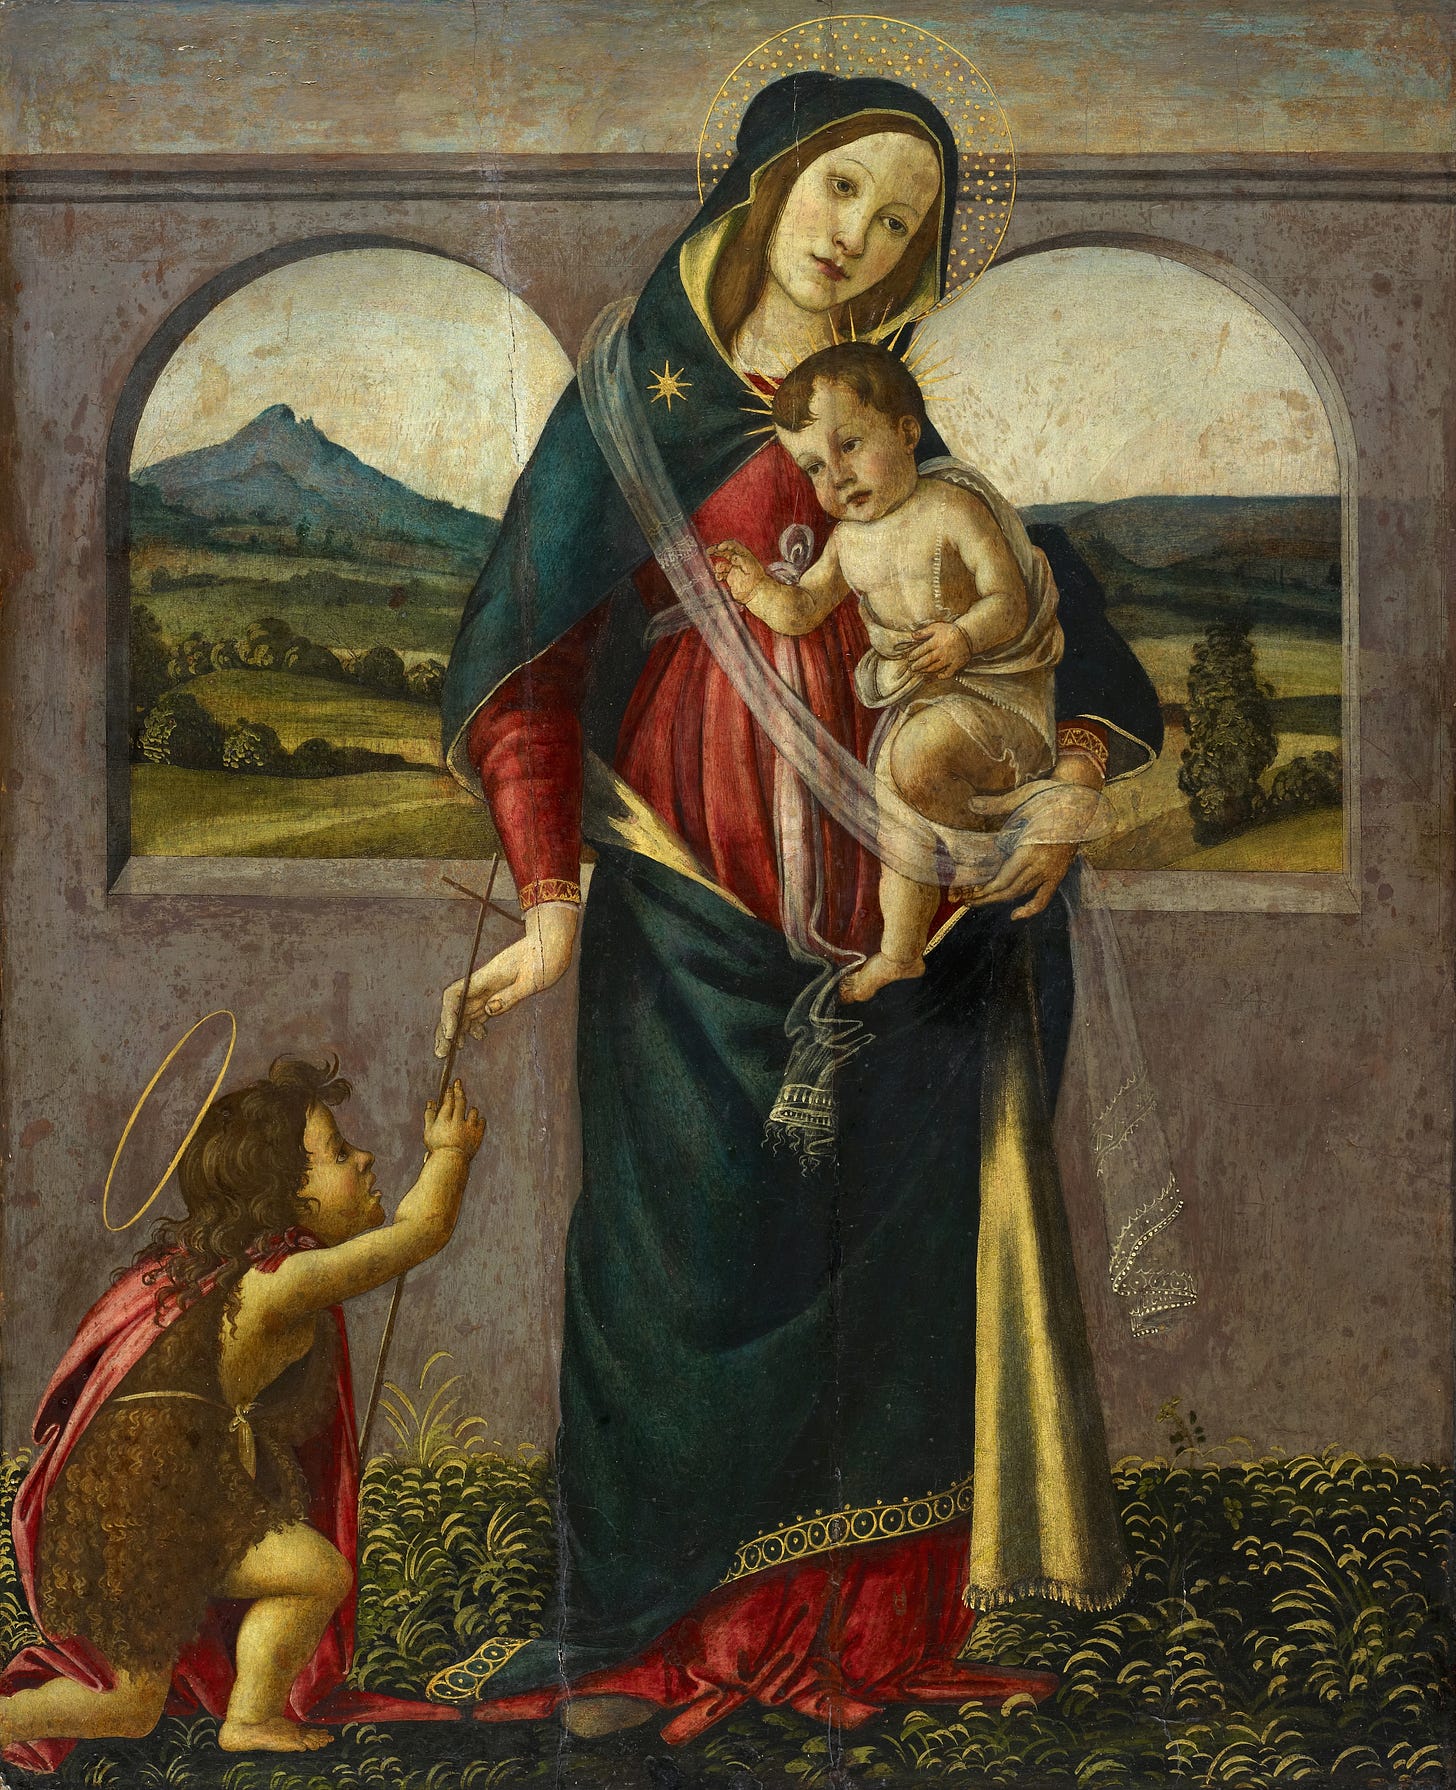 Madonna and Child with the Infant Saint John the Baptist by Sandro Botticelli School (Italian, 1445-1510)